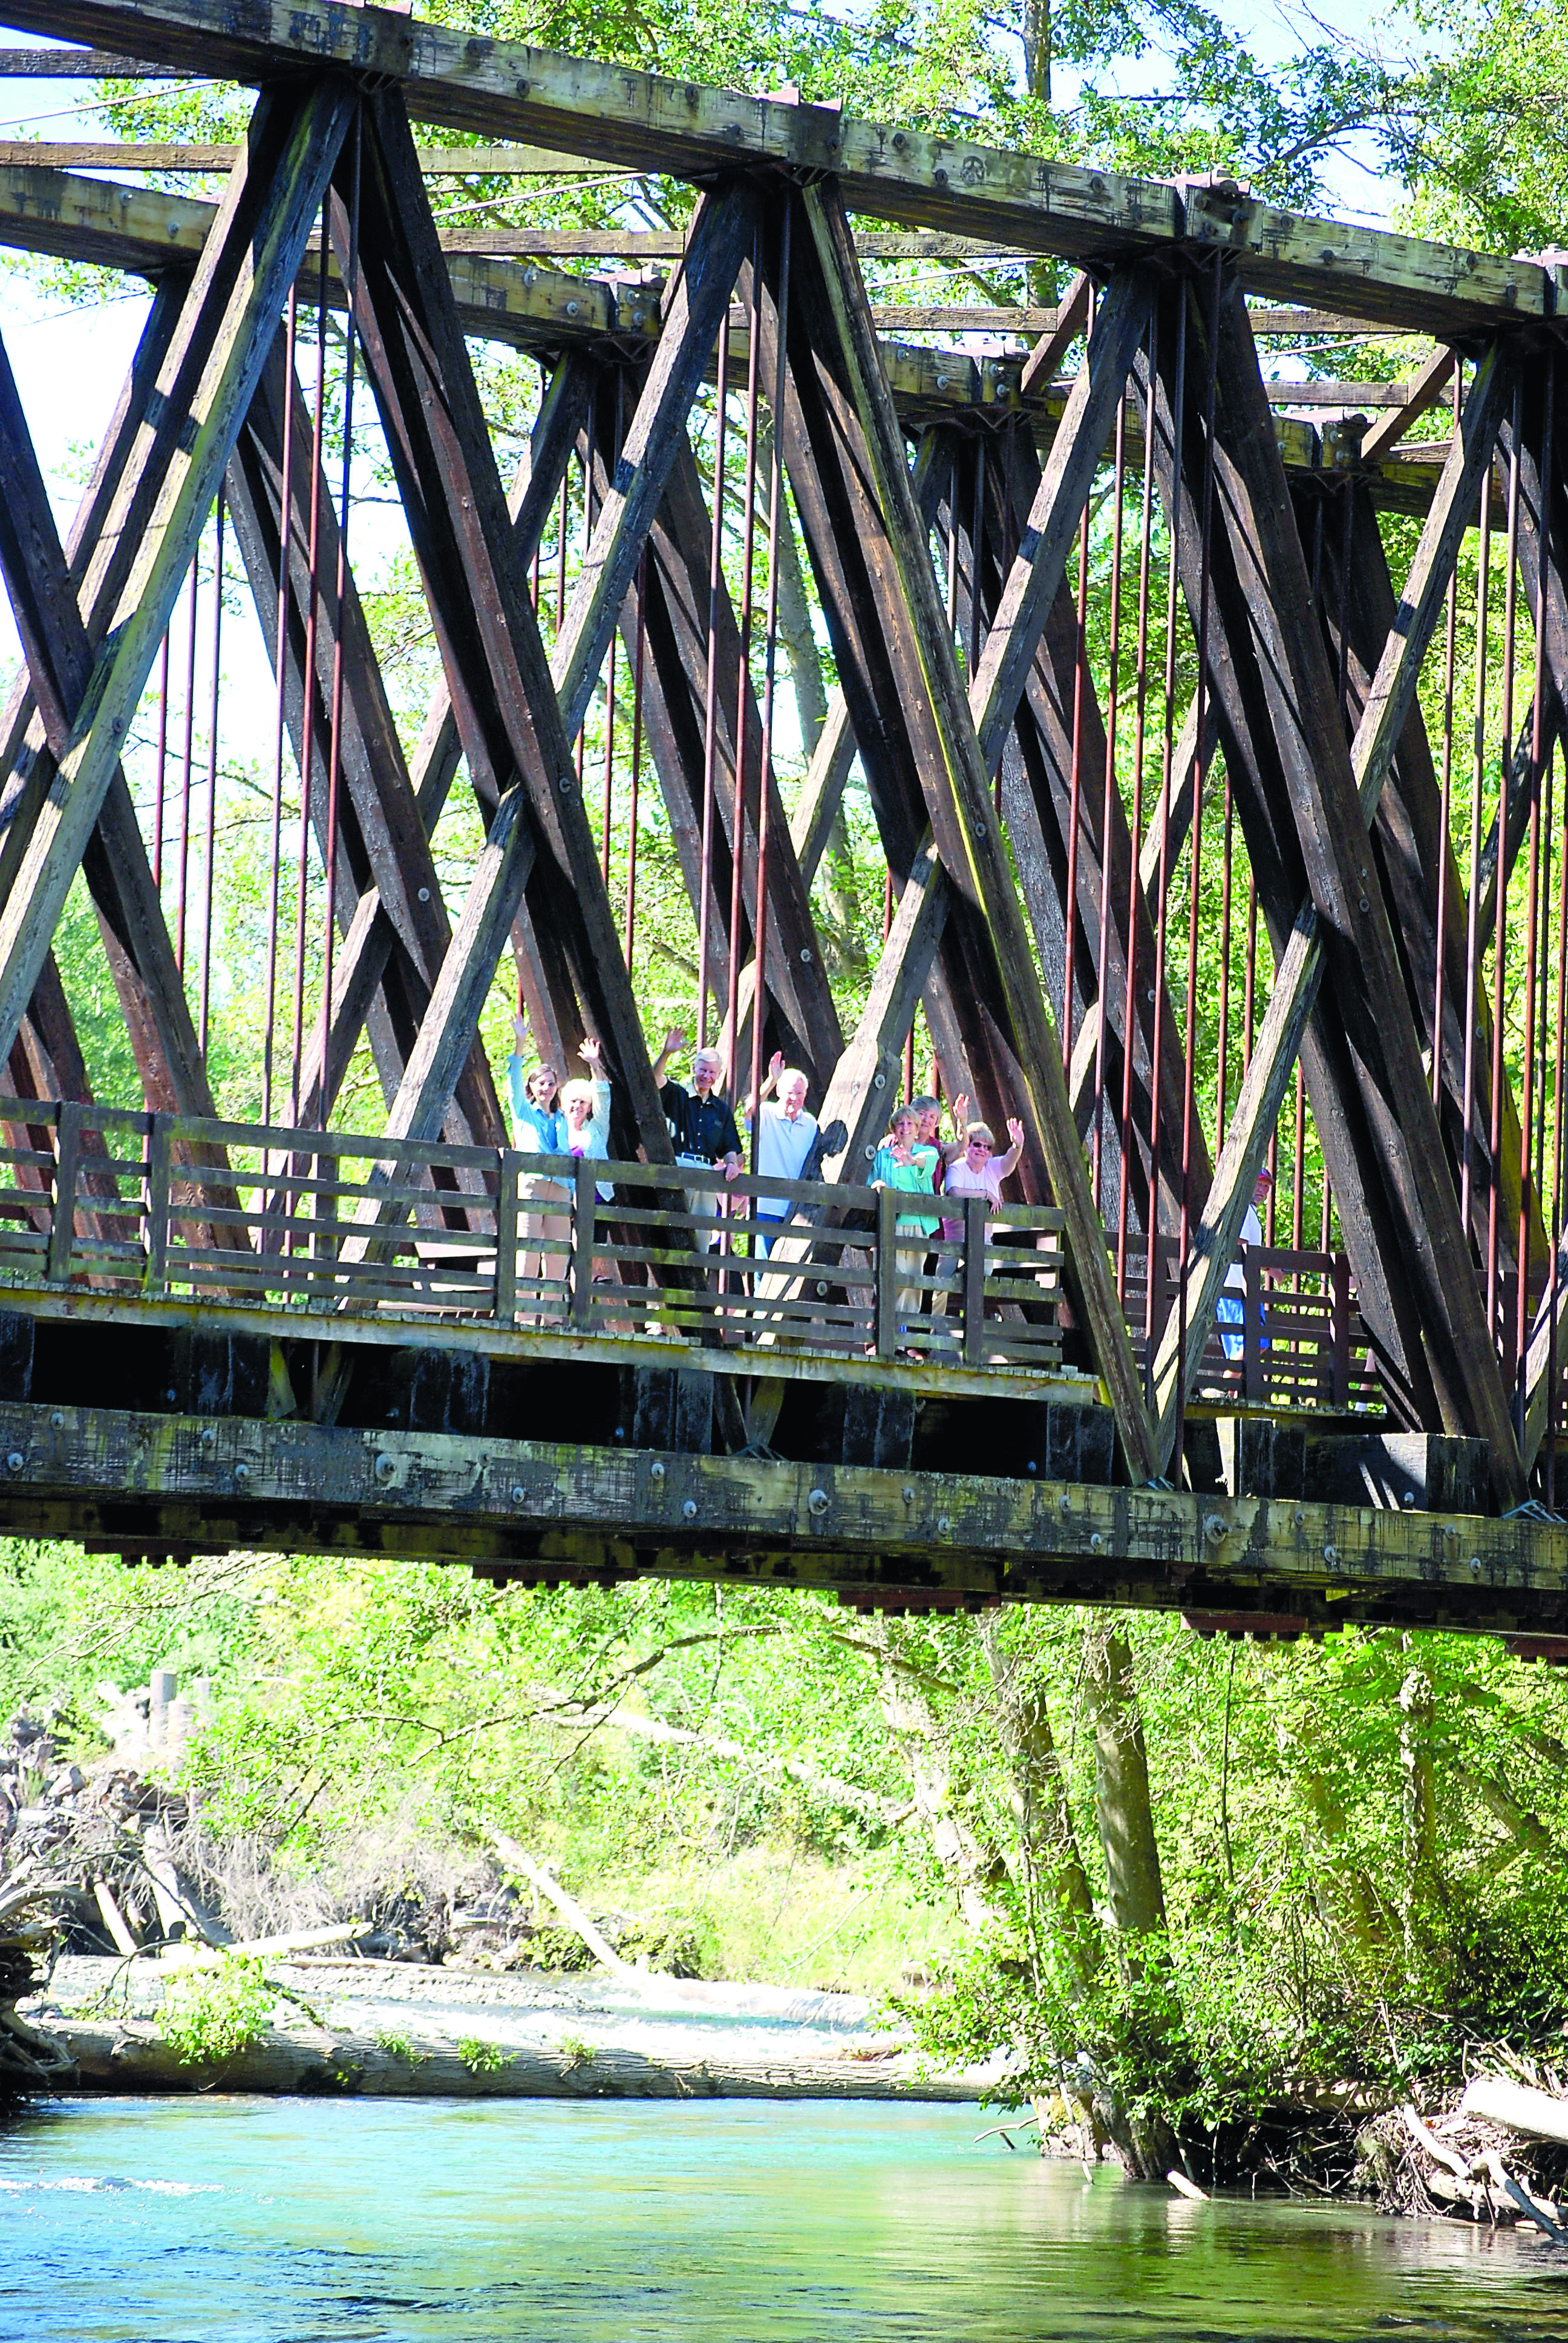 Waving from the Railroad Bridge Park trestle over the Dungeness River are